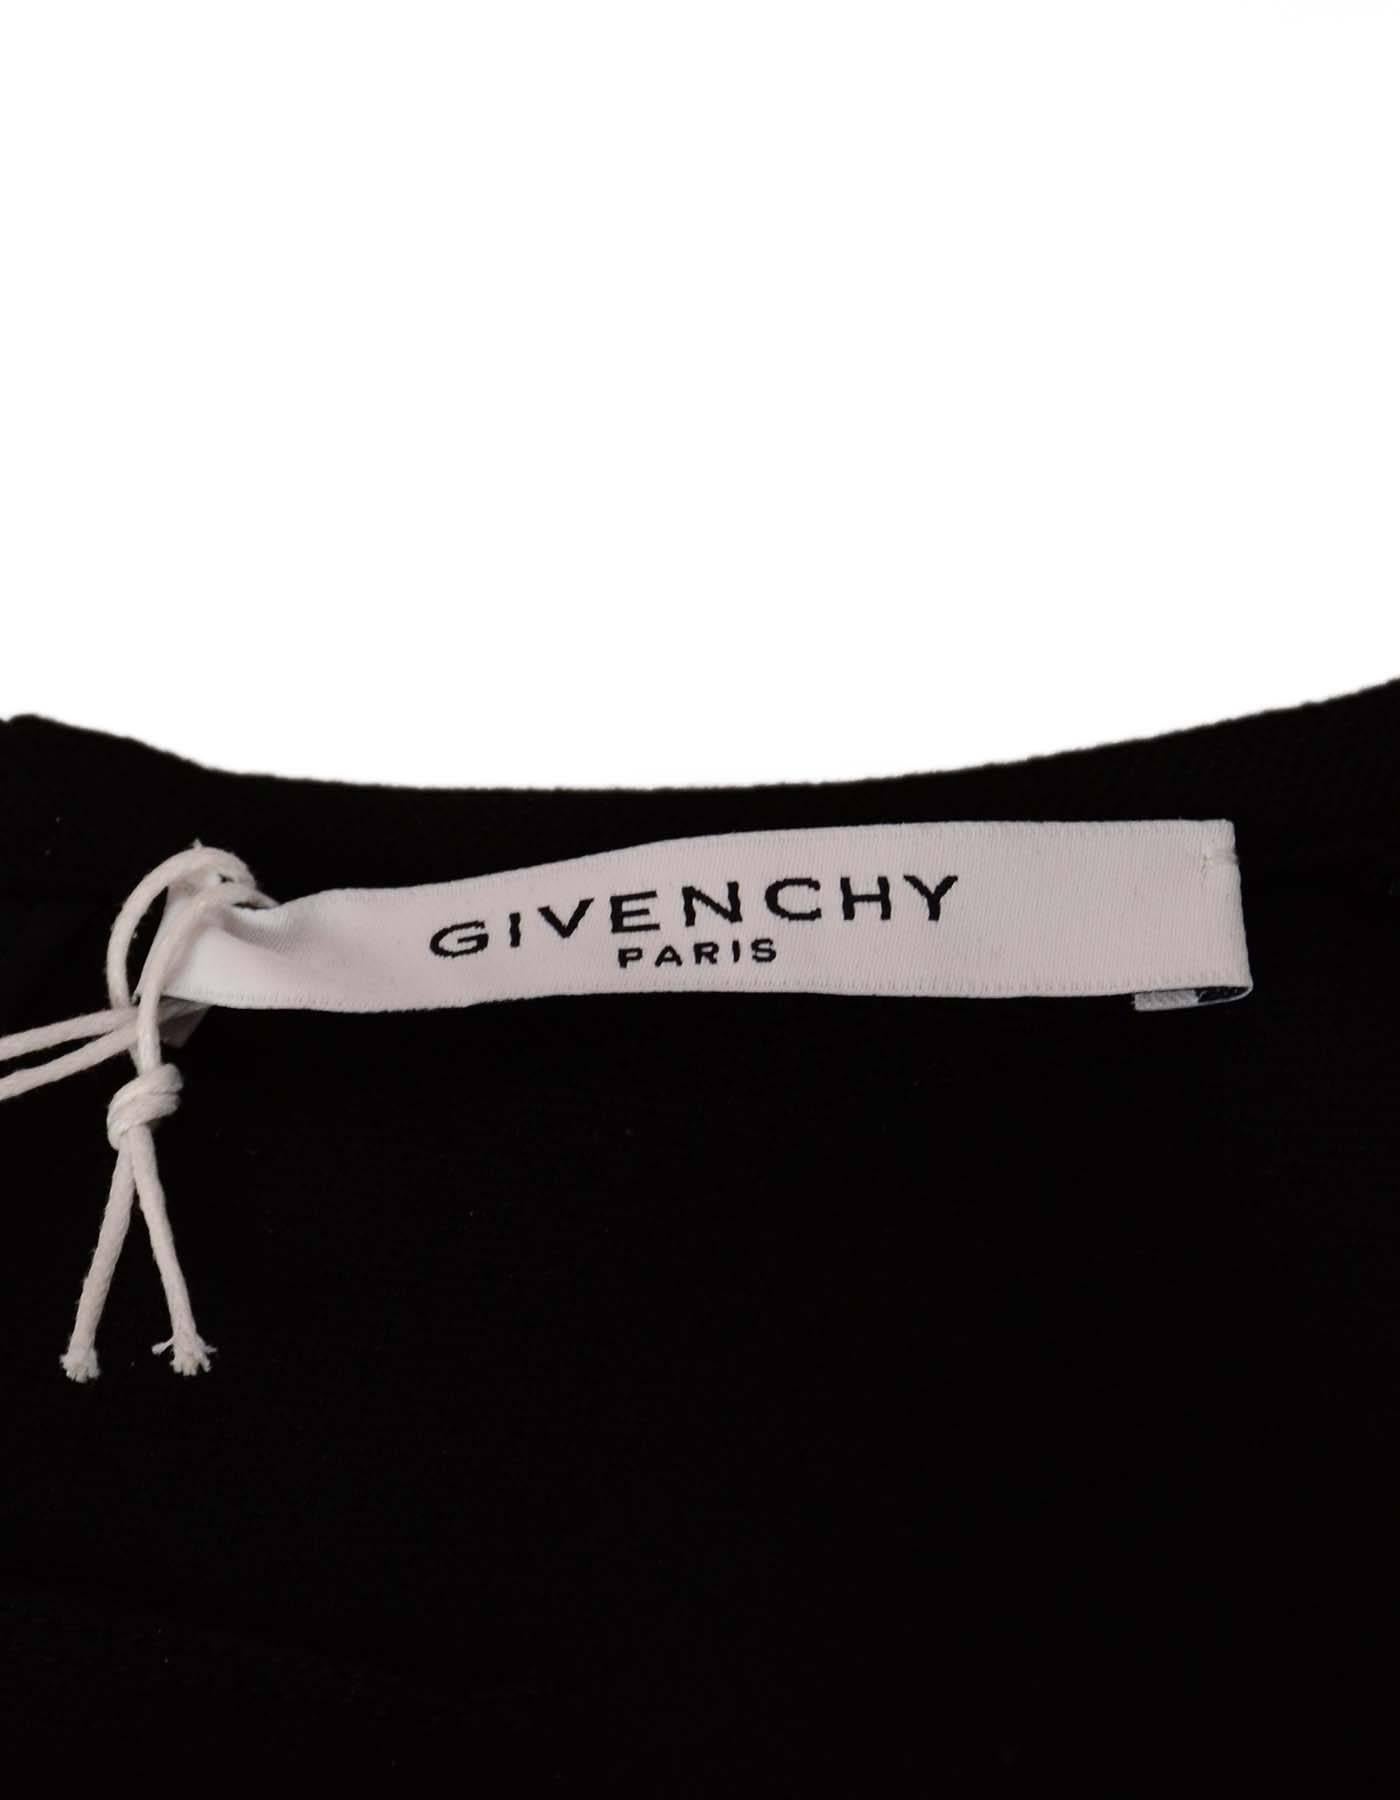 Women's Givenchy NEW W/ TAGS 2016 Black Lace-Up Dress Sz 40 rt. $2, 580